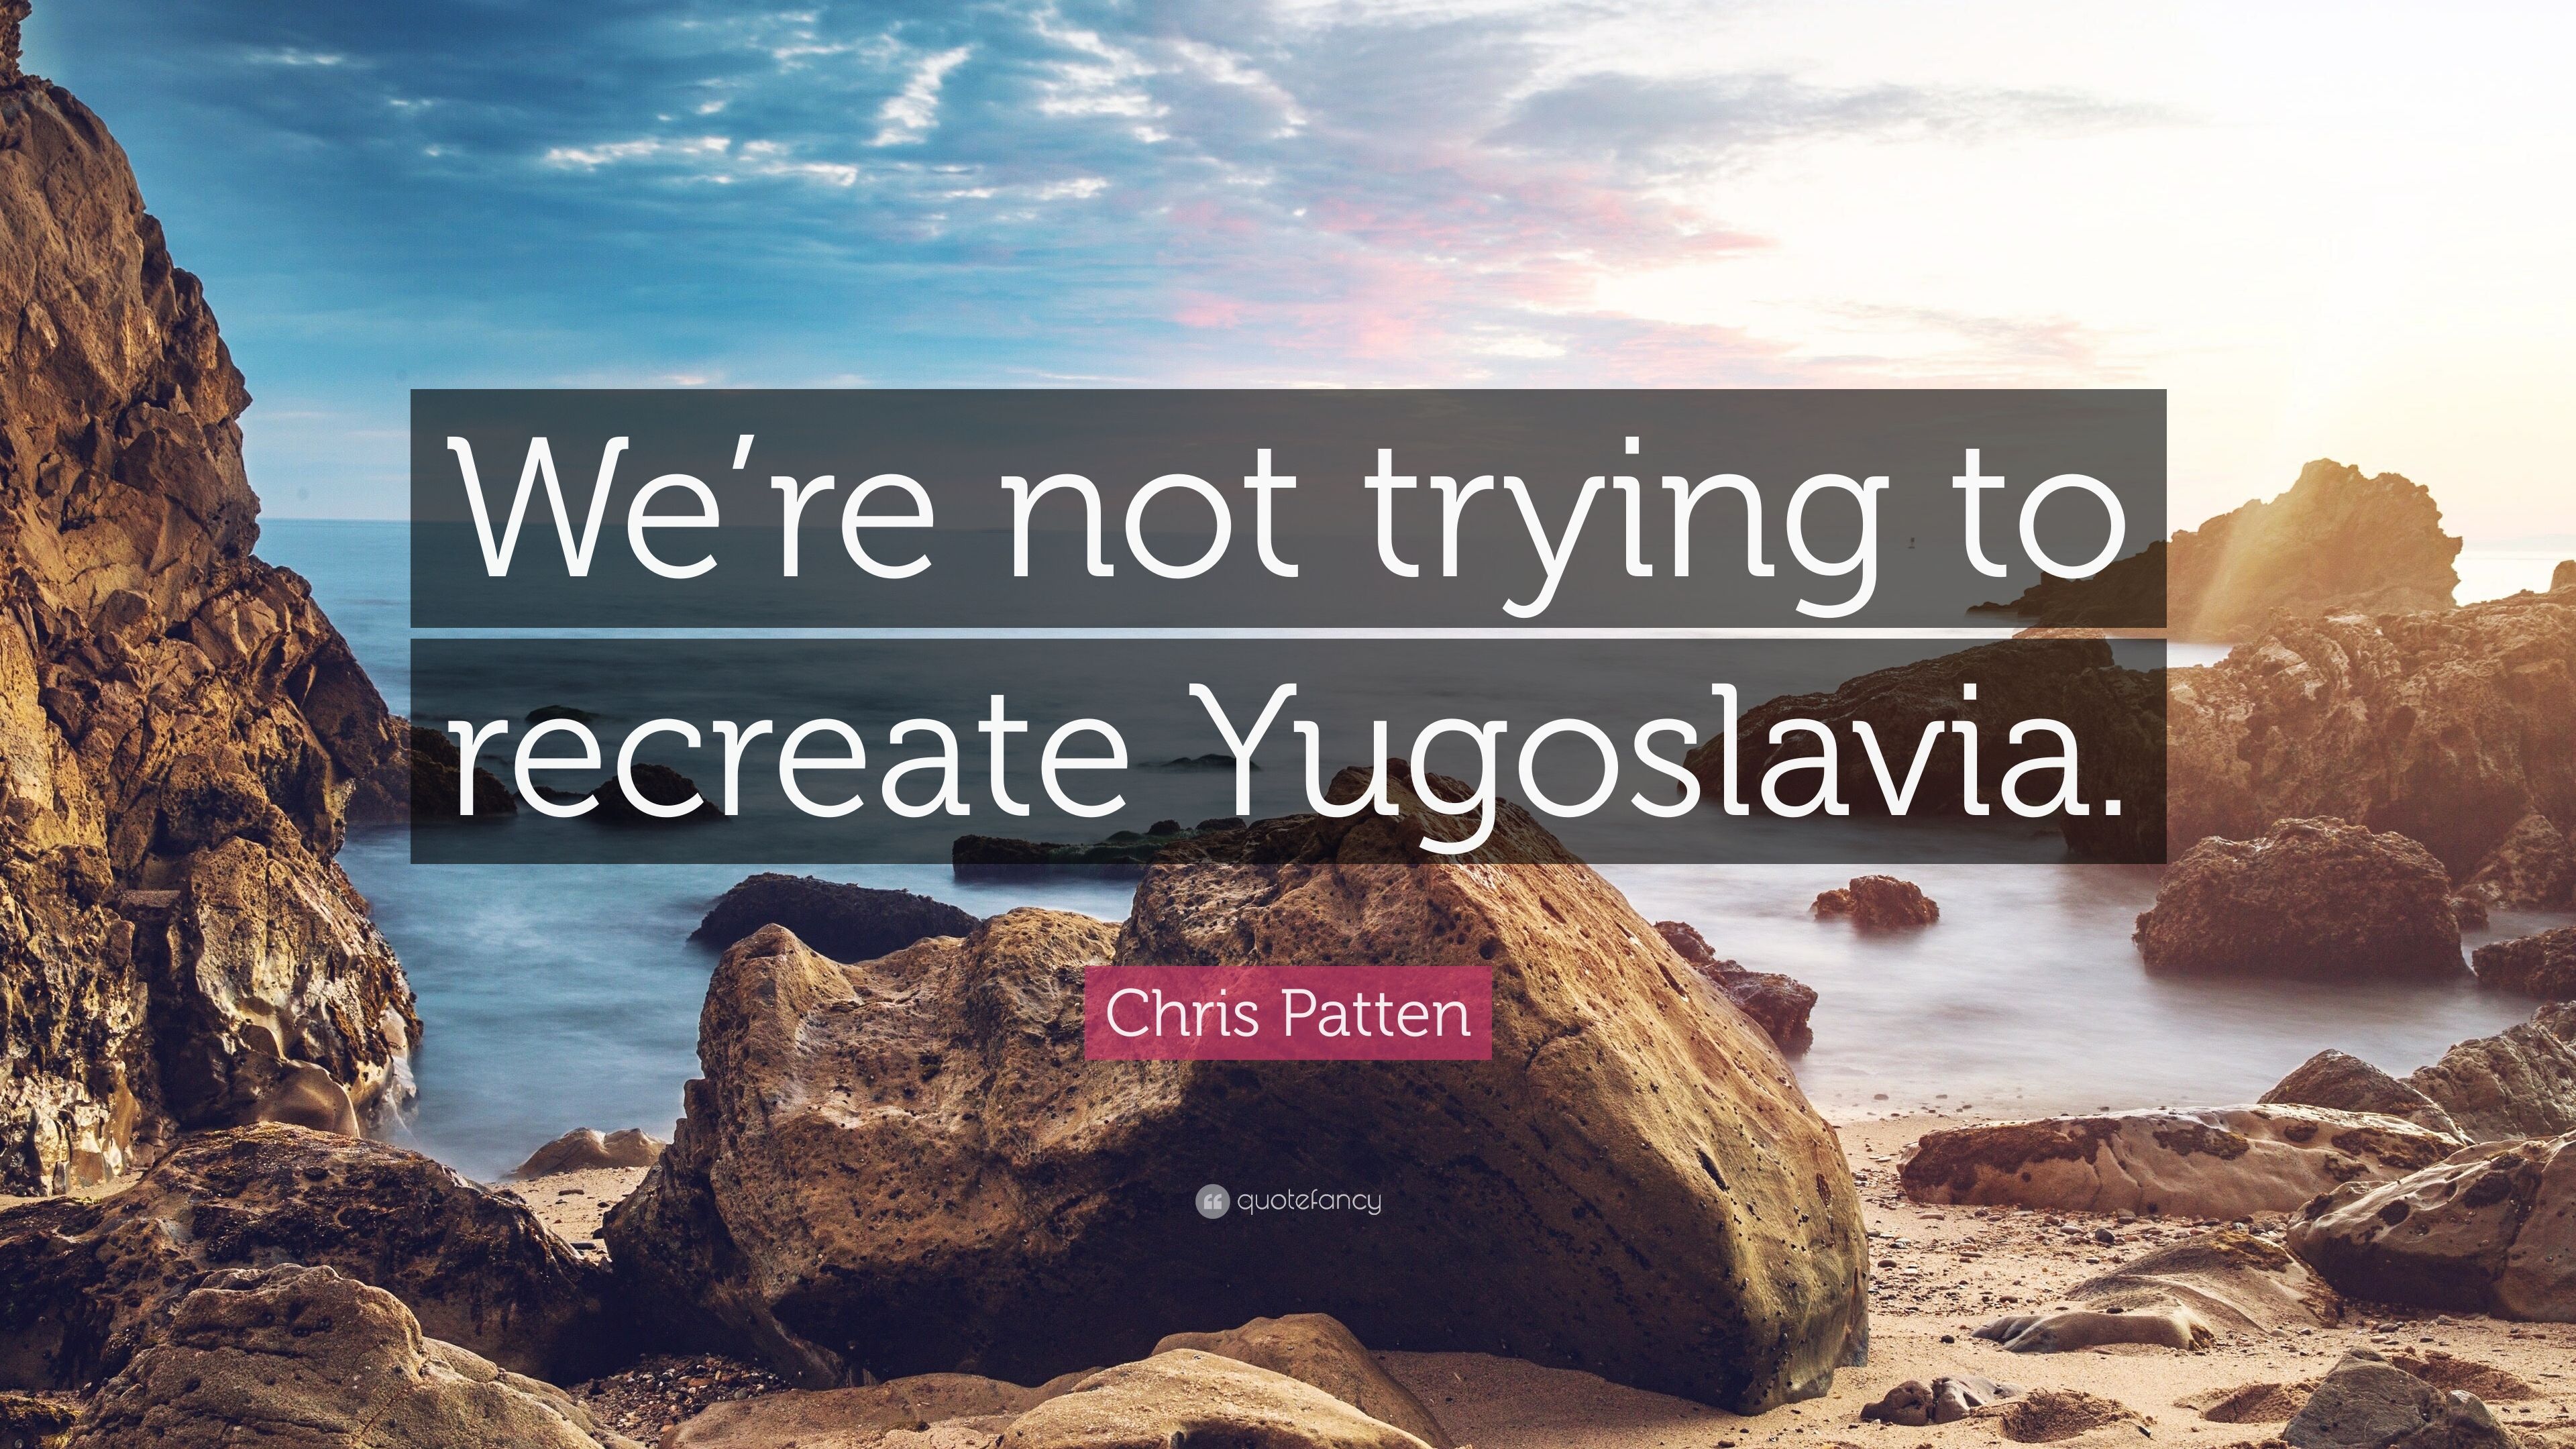 Chris Patten Quote: “We're not trying to recreate Yugoslavia.” 7